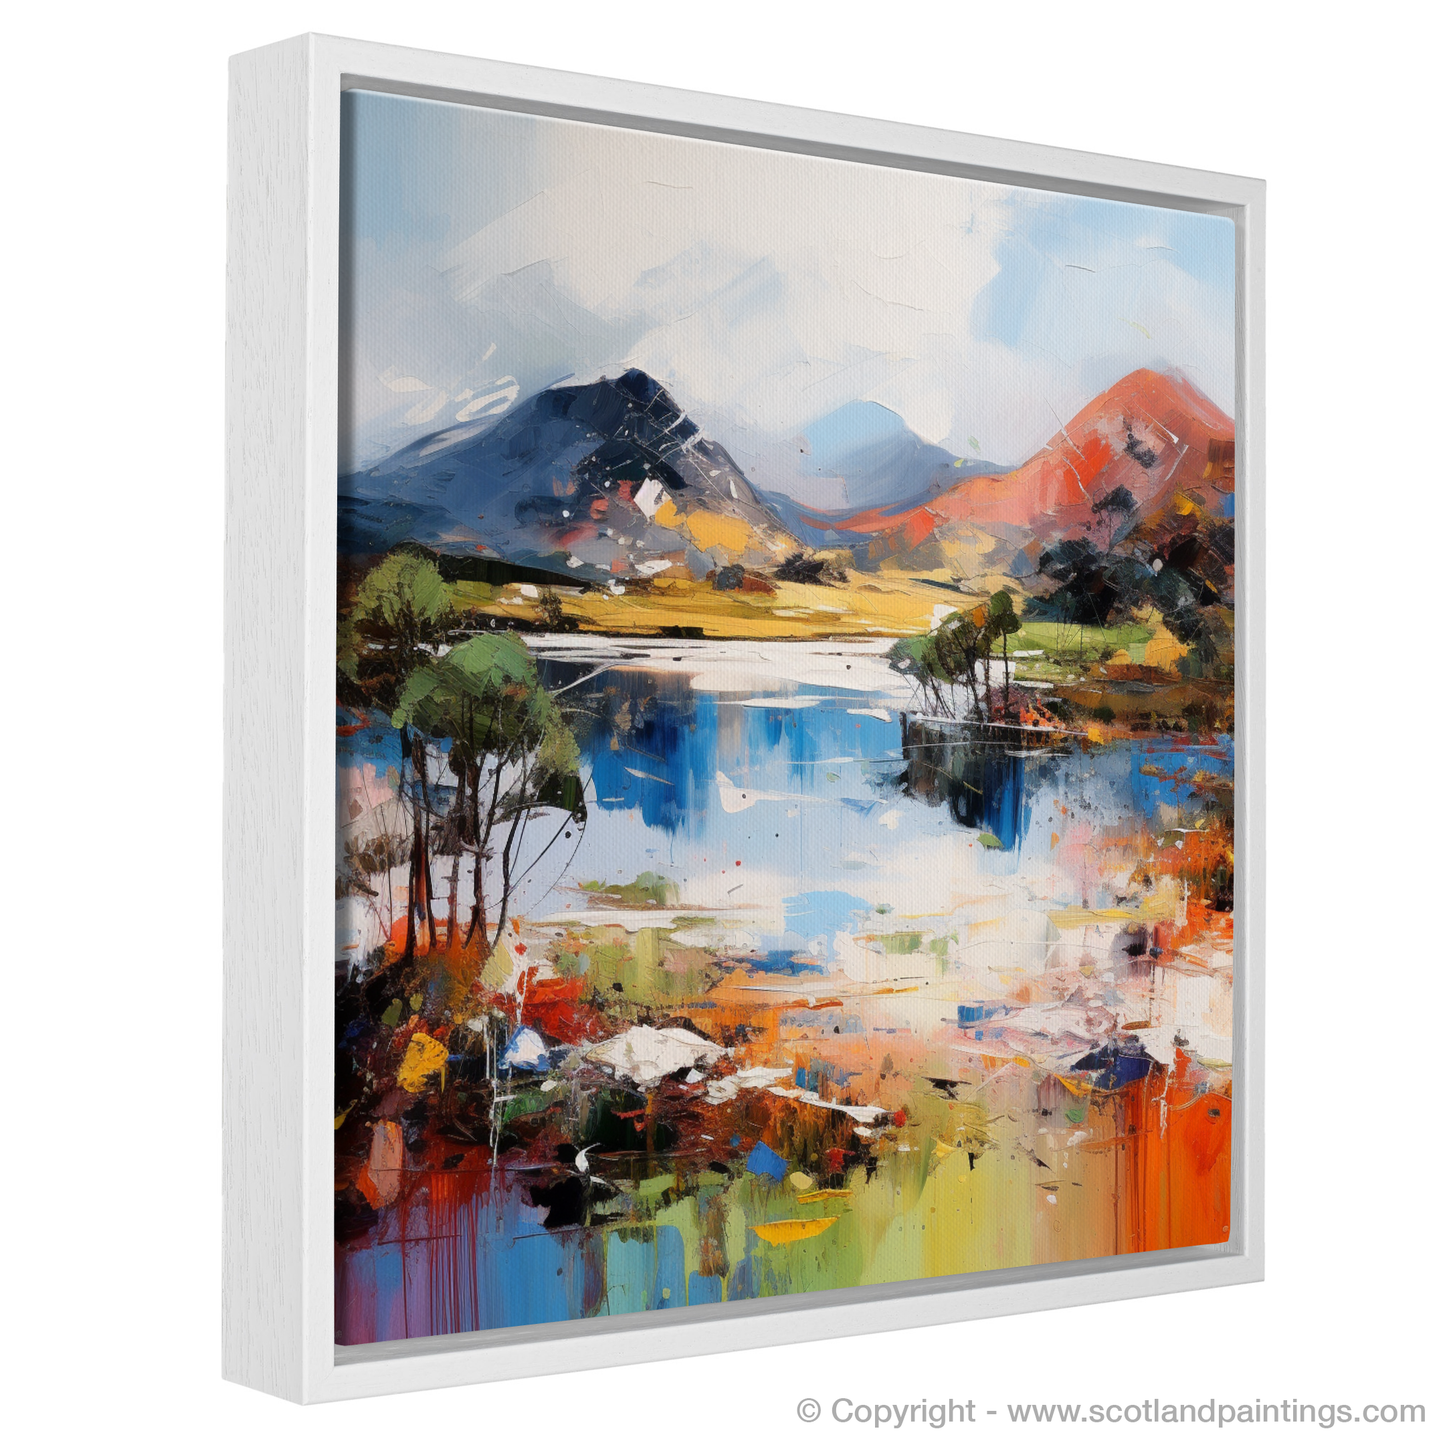 Painting and Art Print of Loch Glencoul, Sutherland in summer entitled "Summer Blaze at Loch Glencoul".